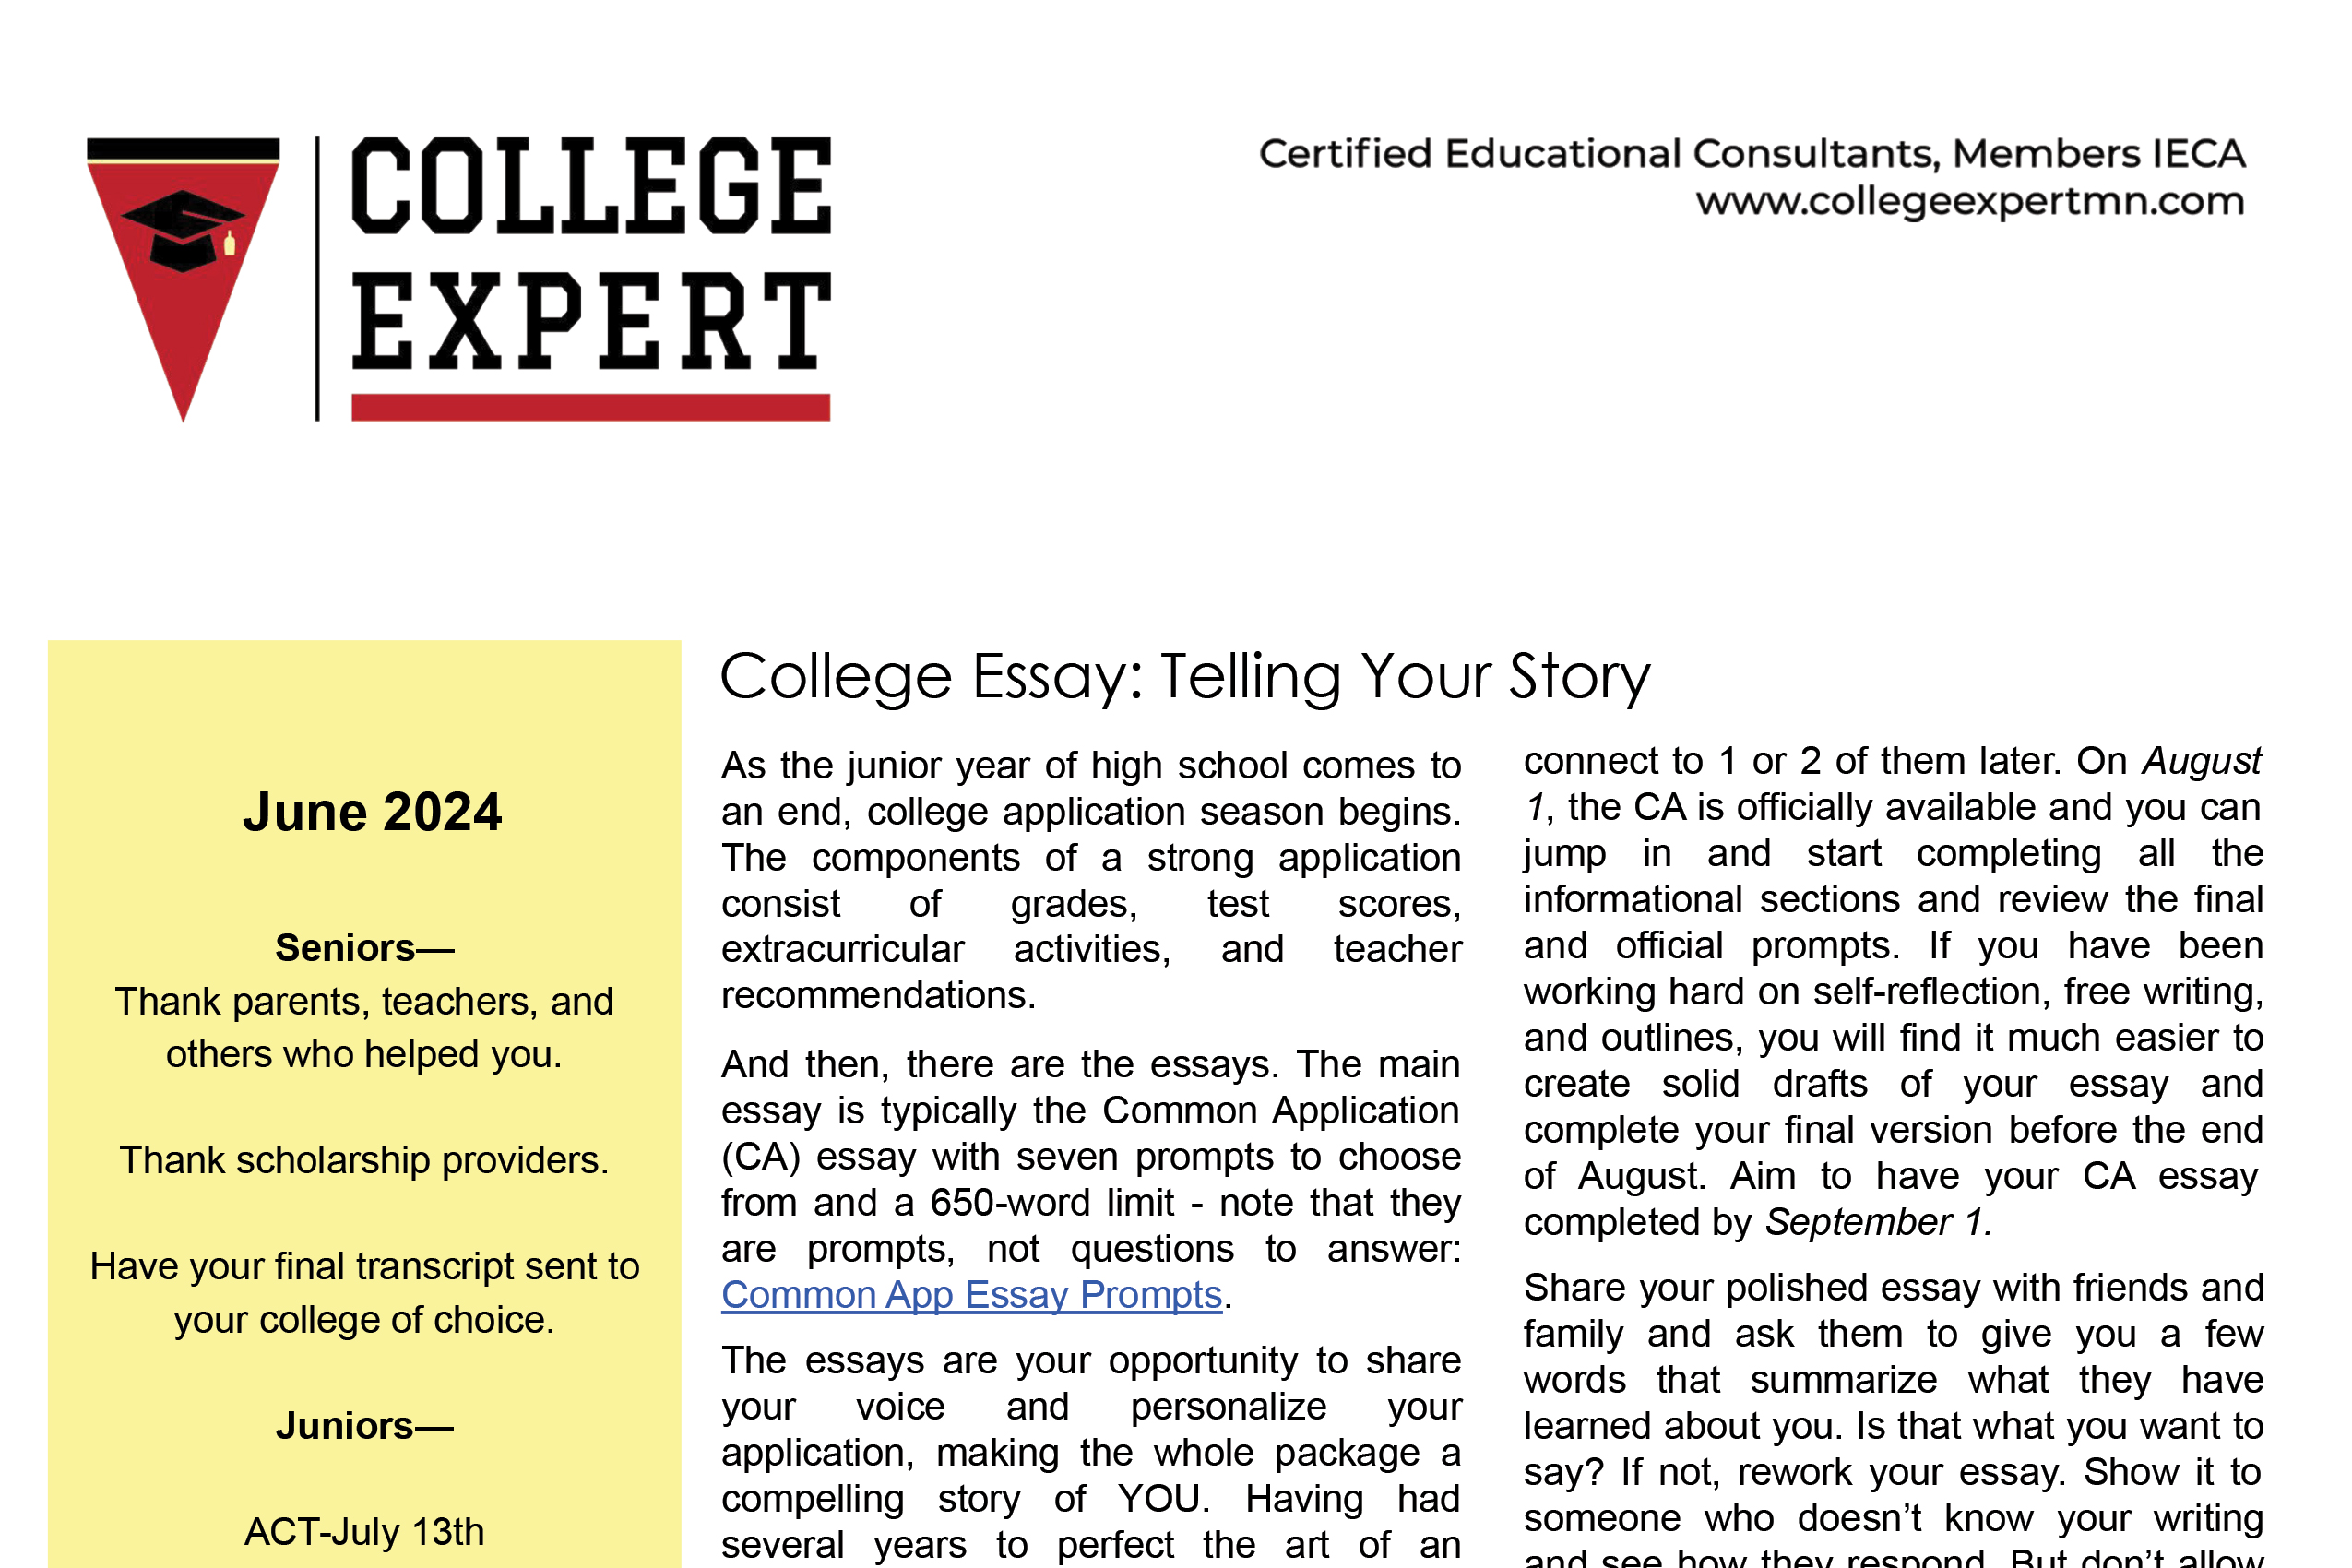 Featured image for “June College Expert Newsletter”